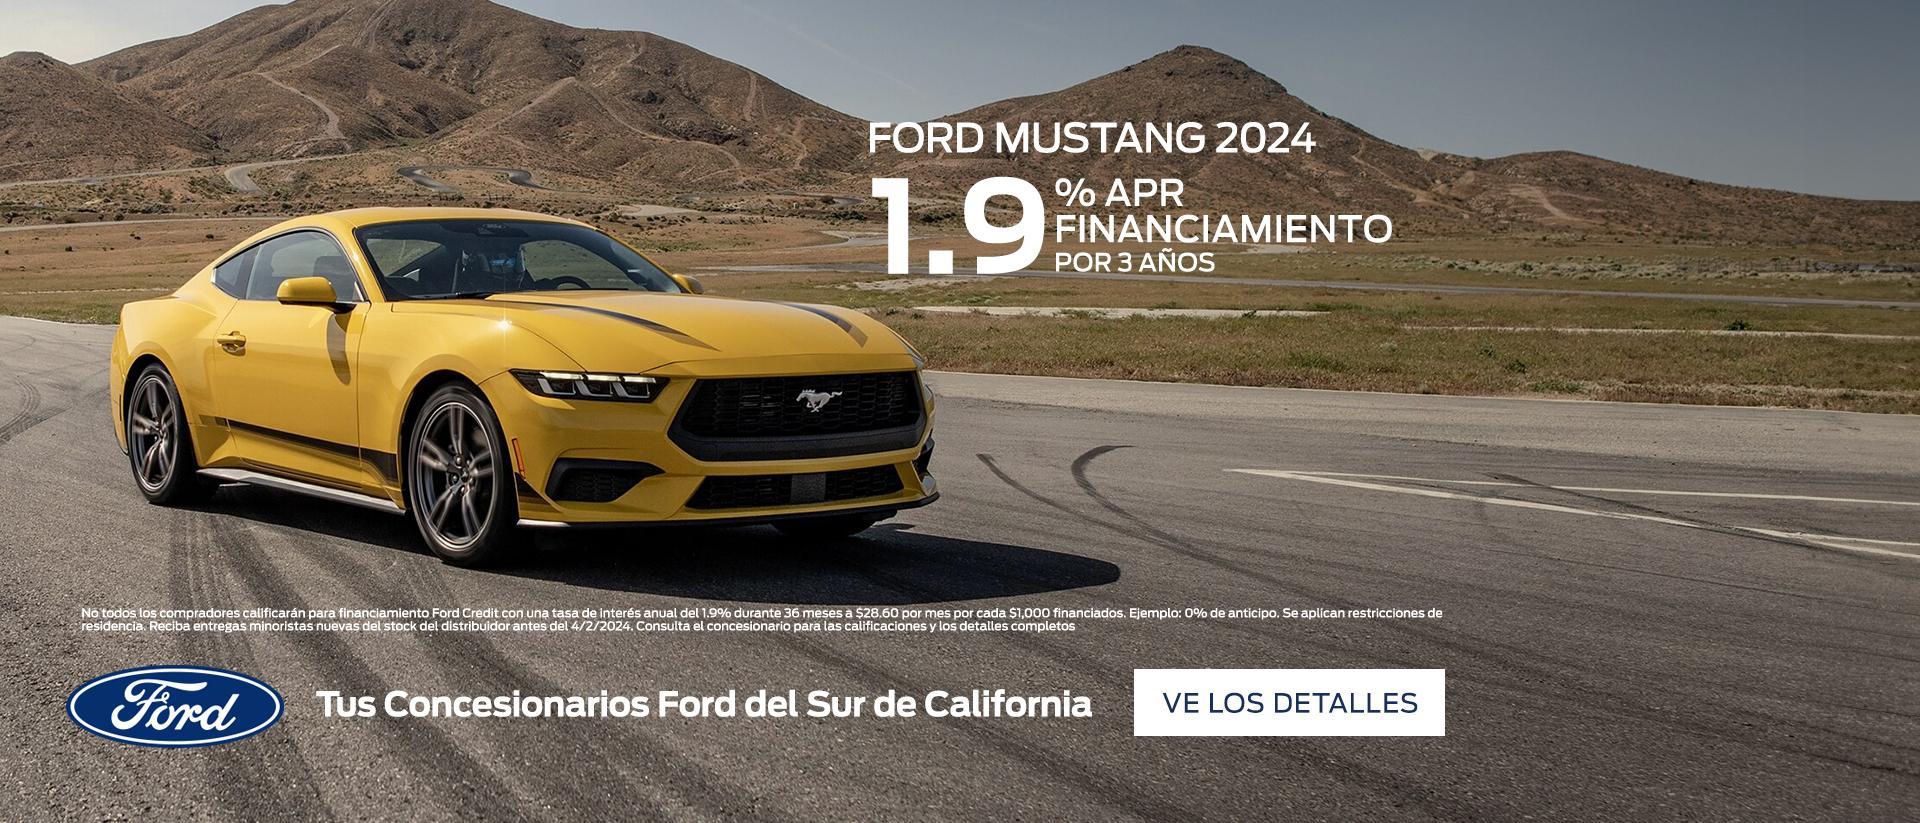 2024 Ford Mustang Purchase Offer | Southern California Ford Dealers